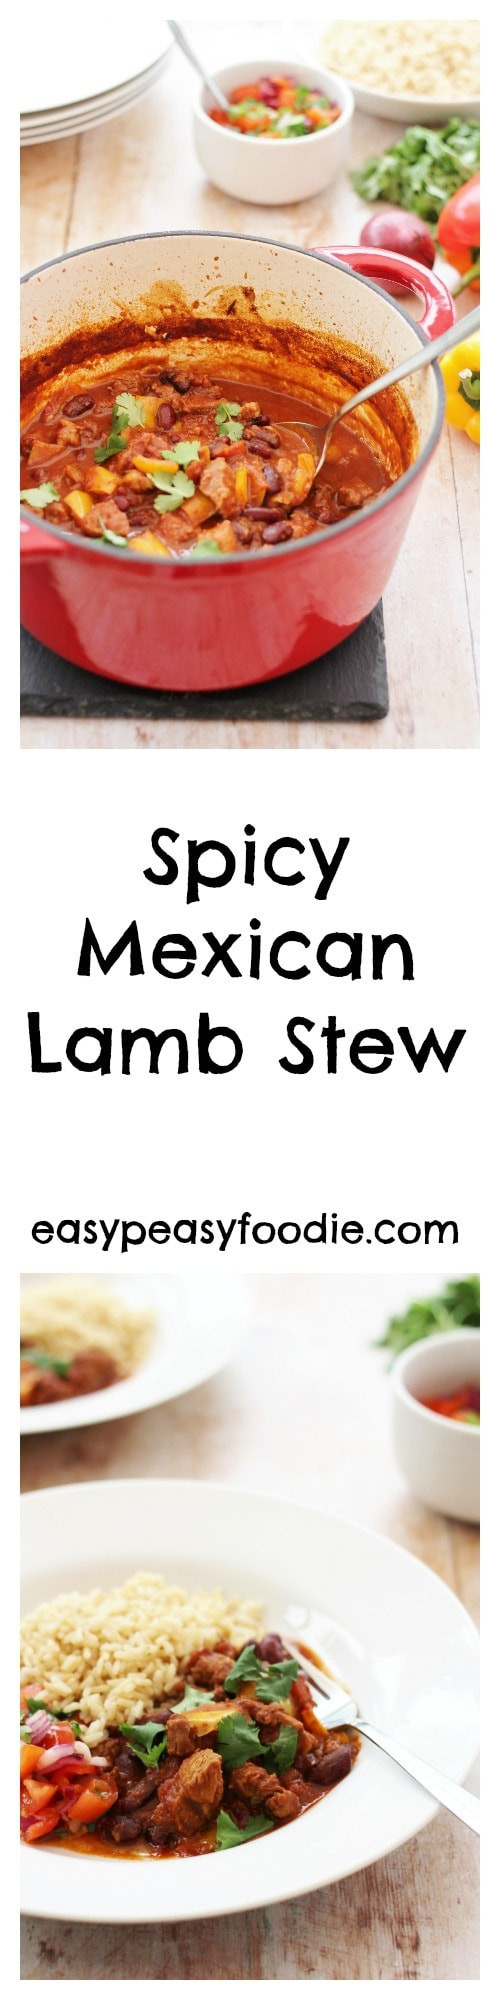 Spicy Lamb Stew
 Spicy Mexican Lamb Stew & Easy Peasy Salsa Easy Peasy Foo